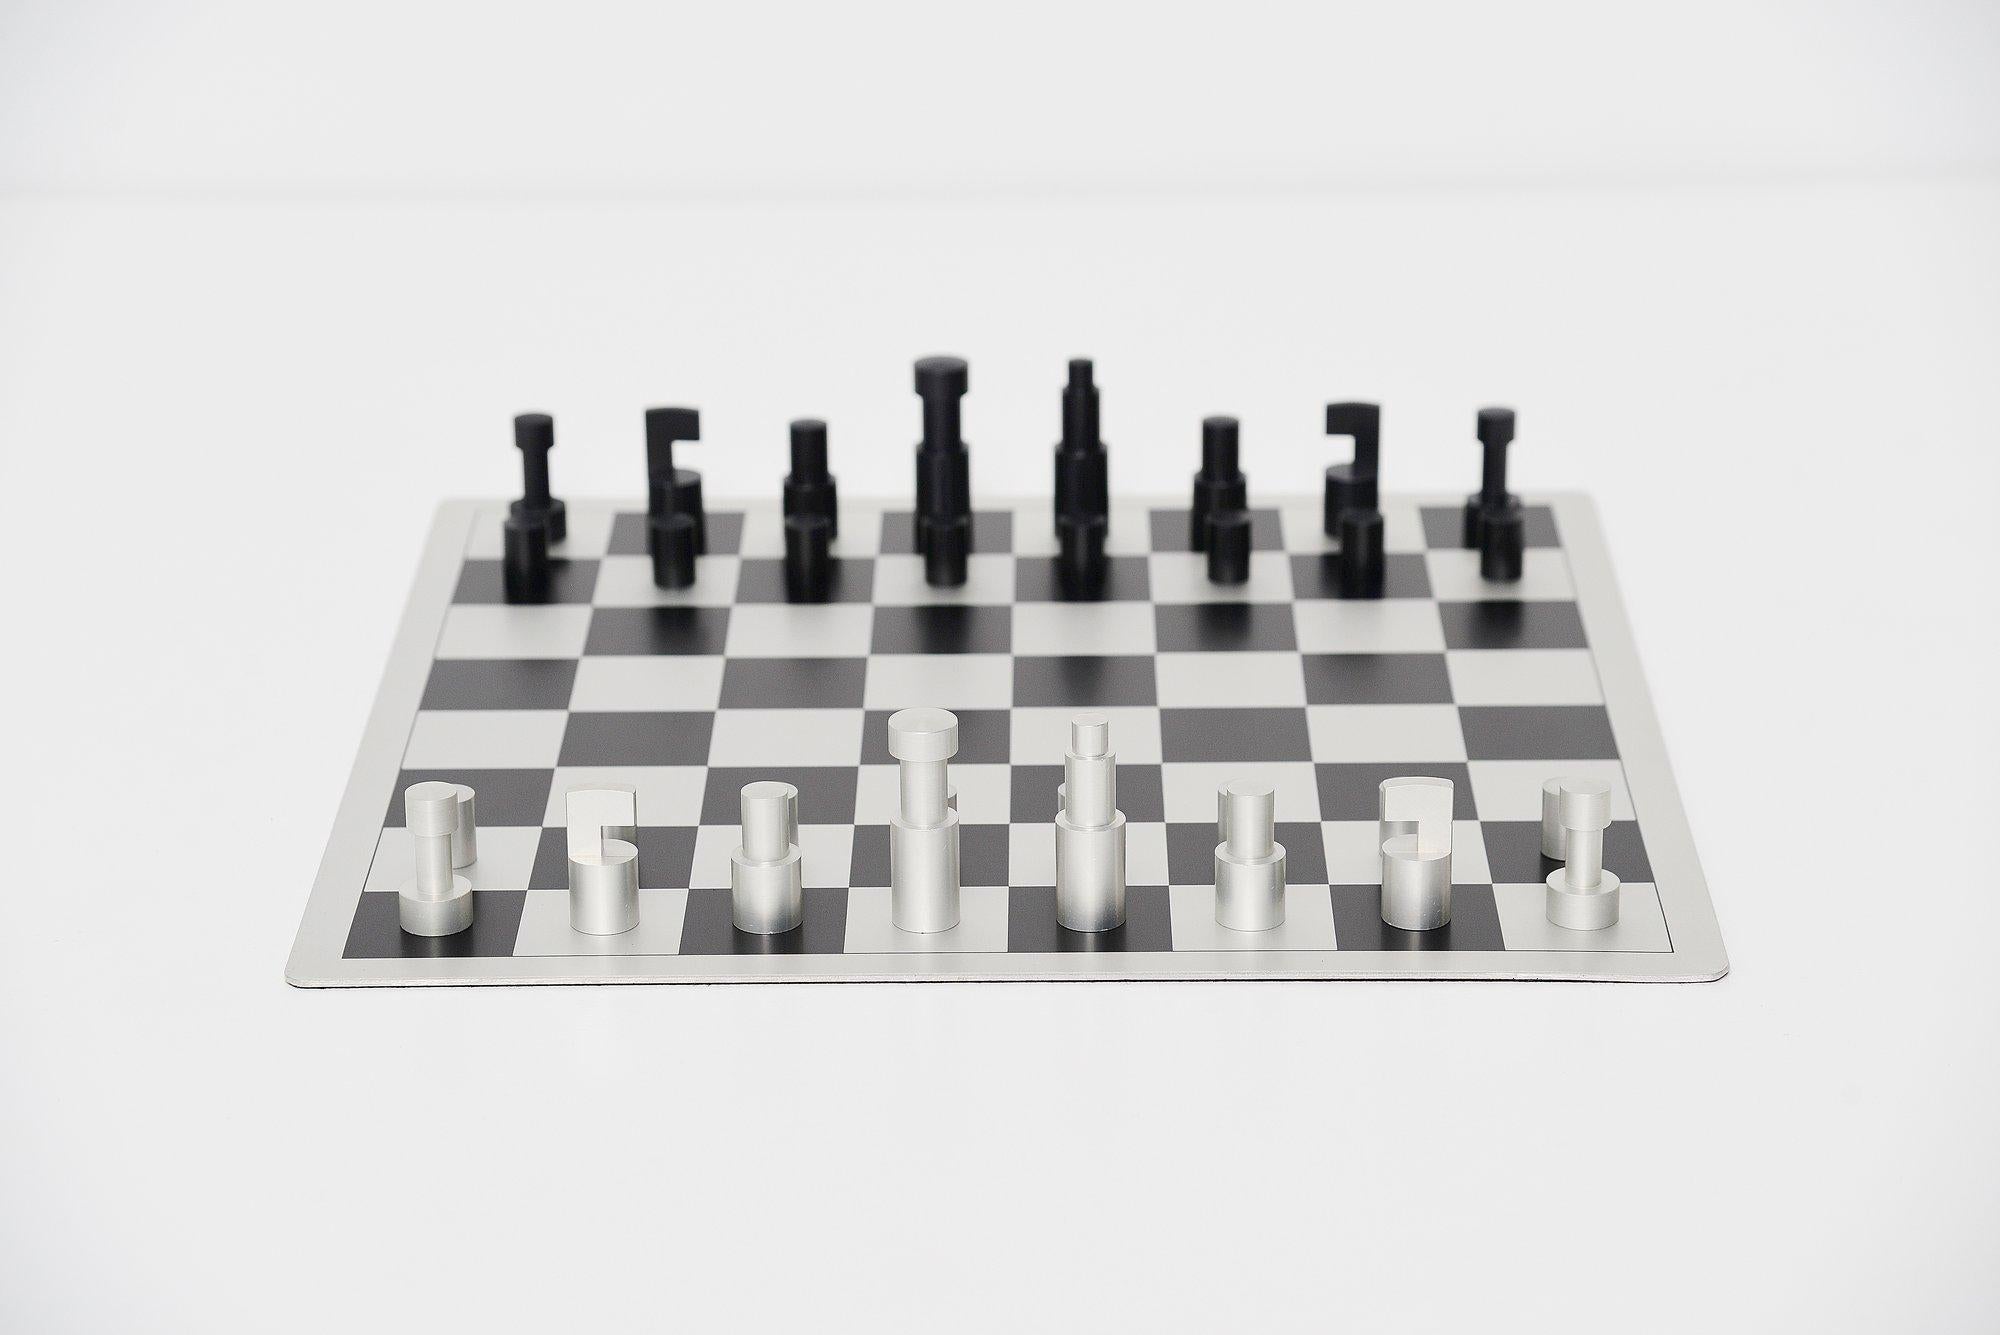 Rare limited edition reedition from the chess set designed by Vilmos Huszar in 1921. This chess set was produced by J.P. Smid in a limited edition of 250 pieces in 1973, this is number 249 or 250. The chess set is in the collection of several